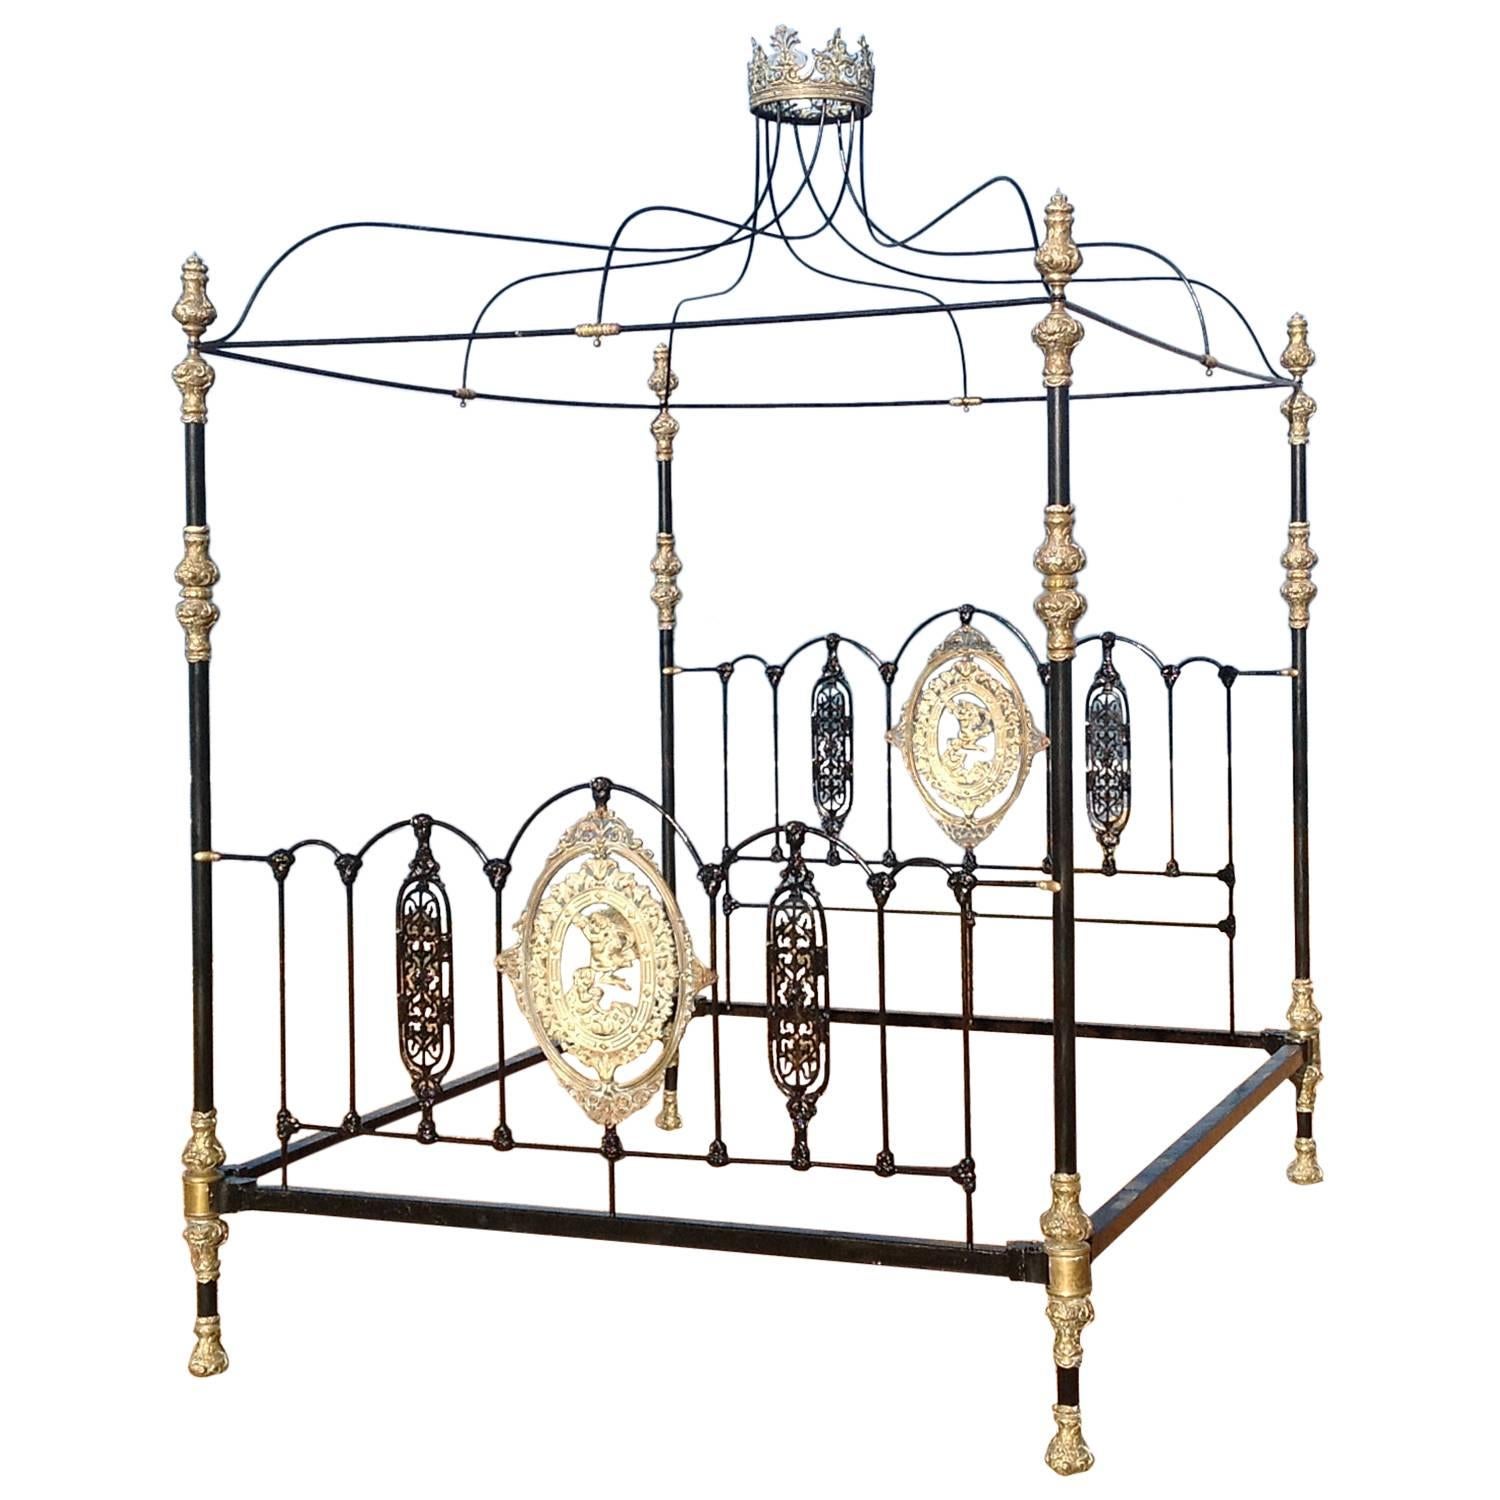  Four Poster Bed with Canopy and Crown  - M4P14